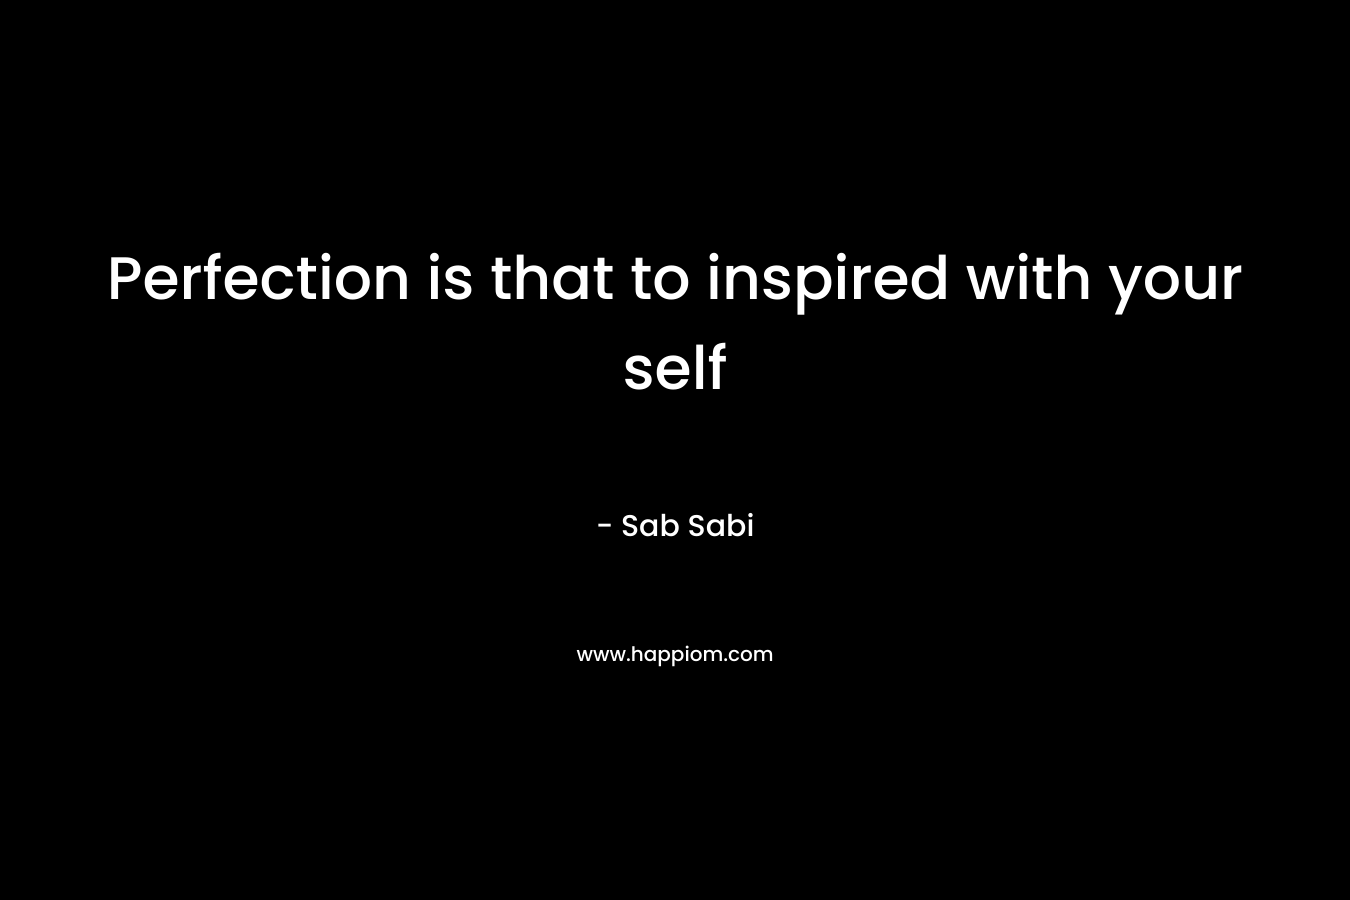 Perfection is that to inspired with your self – Sab Sabi